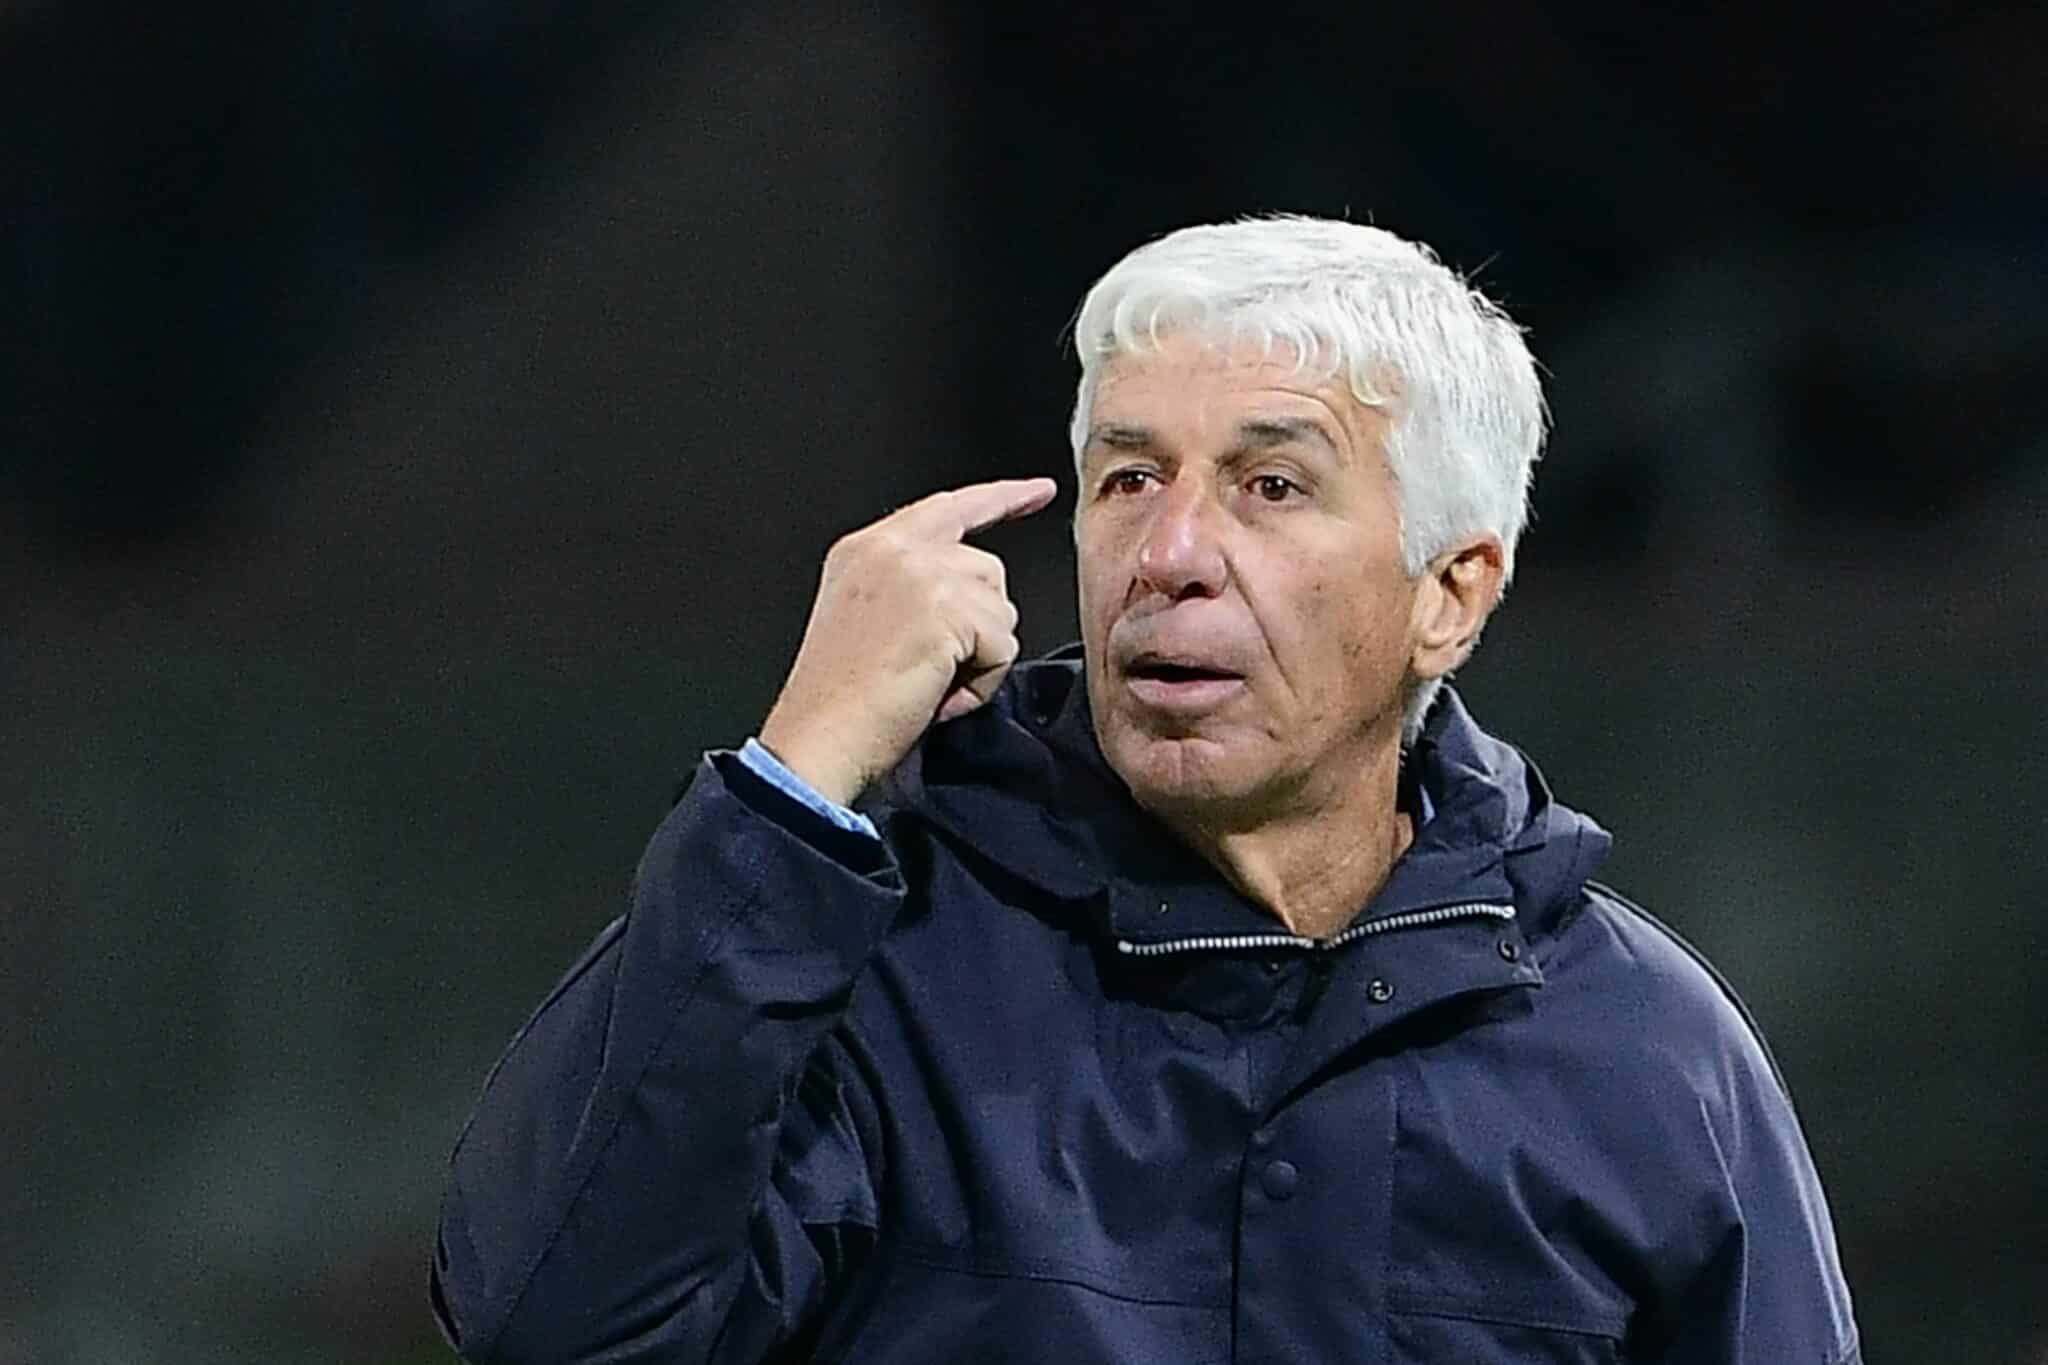 Atalanta face Raków in their UEFA Europa League opener after a year’s absence from Europe, but Gasperini will have to make do without their star striker.